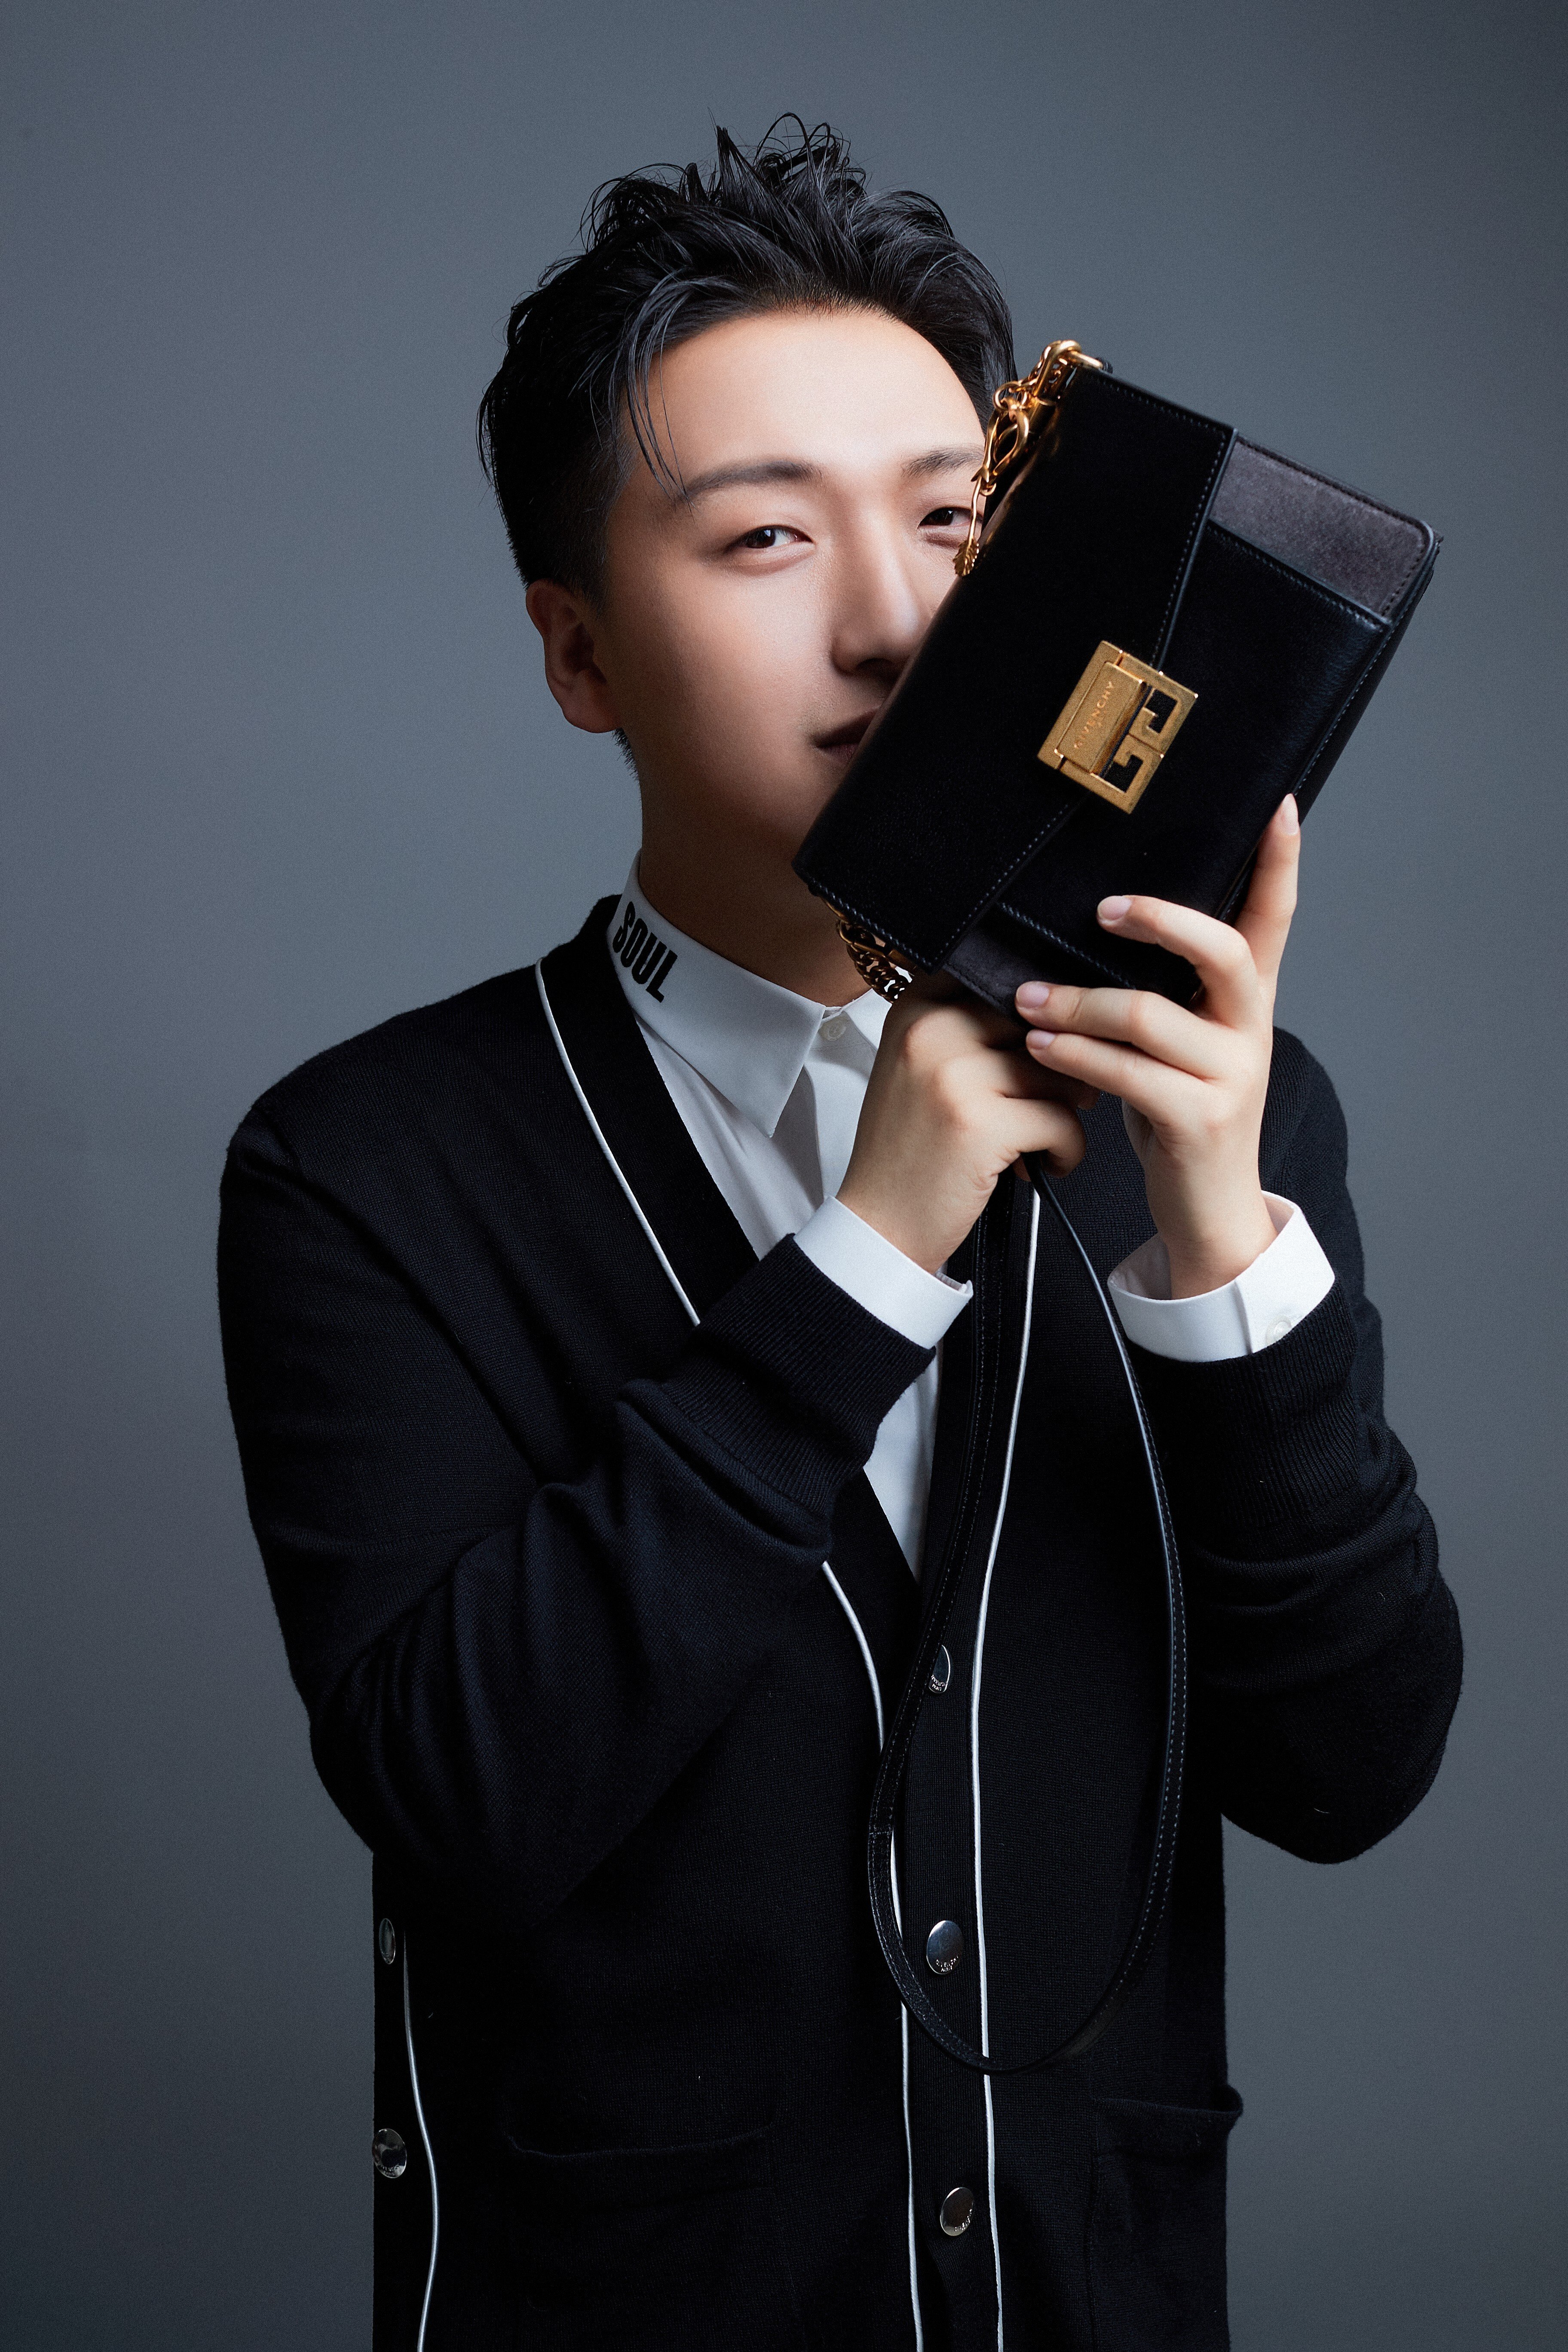 In 2017, Givenchy collaborated with one of China’s most influential KOLs, Tao Liang, known as Mr Bags, on a Chinese Valentine’s Day handbag collection. Photo: Givenchy